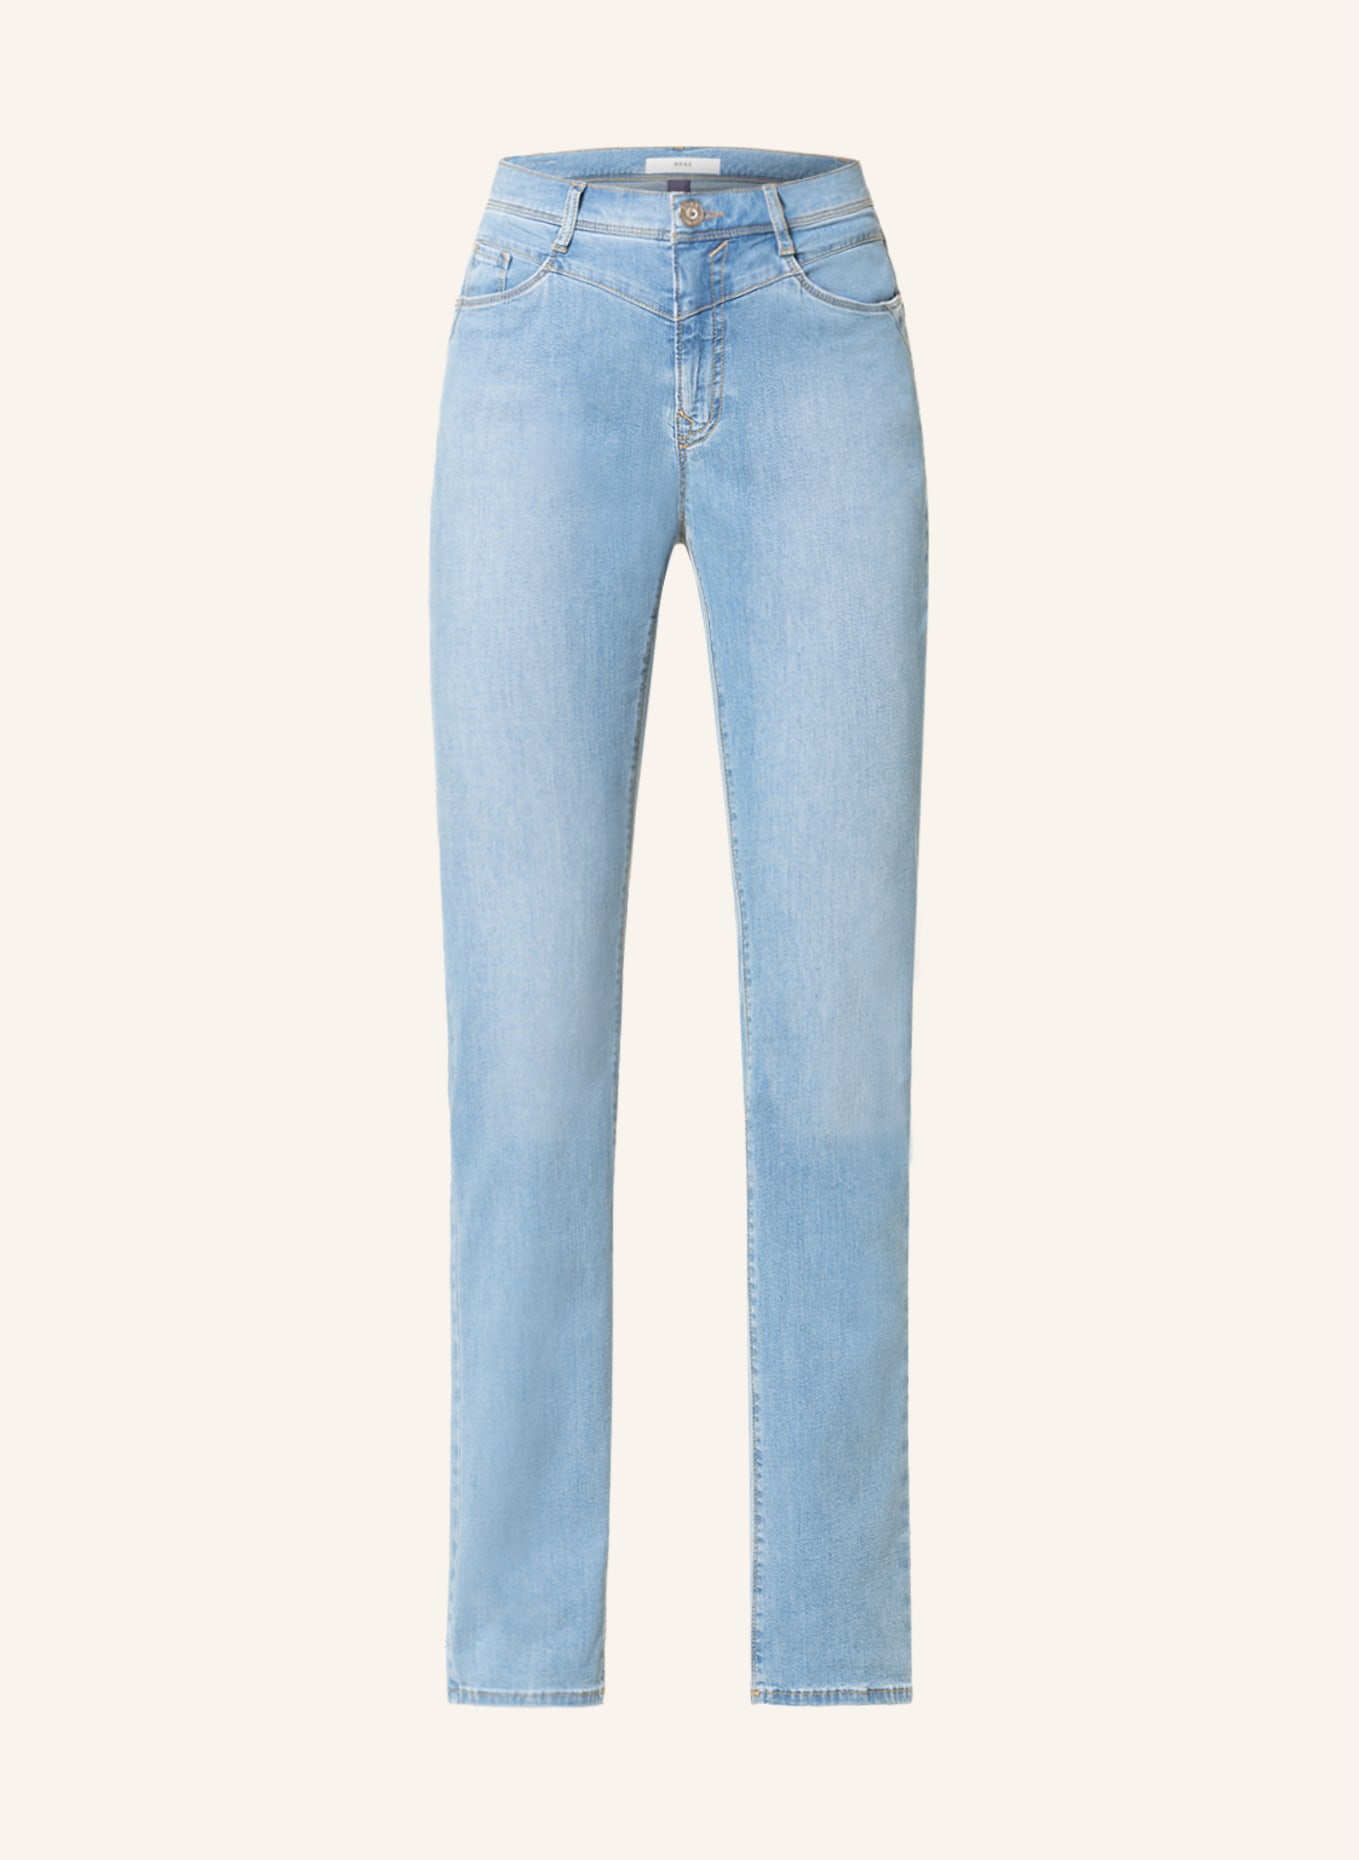 BRAX Jeans MARY in 19 used light blue